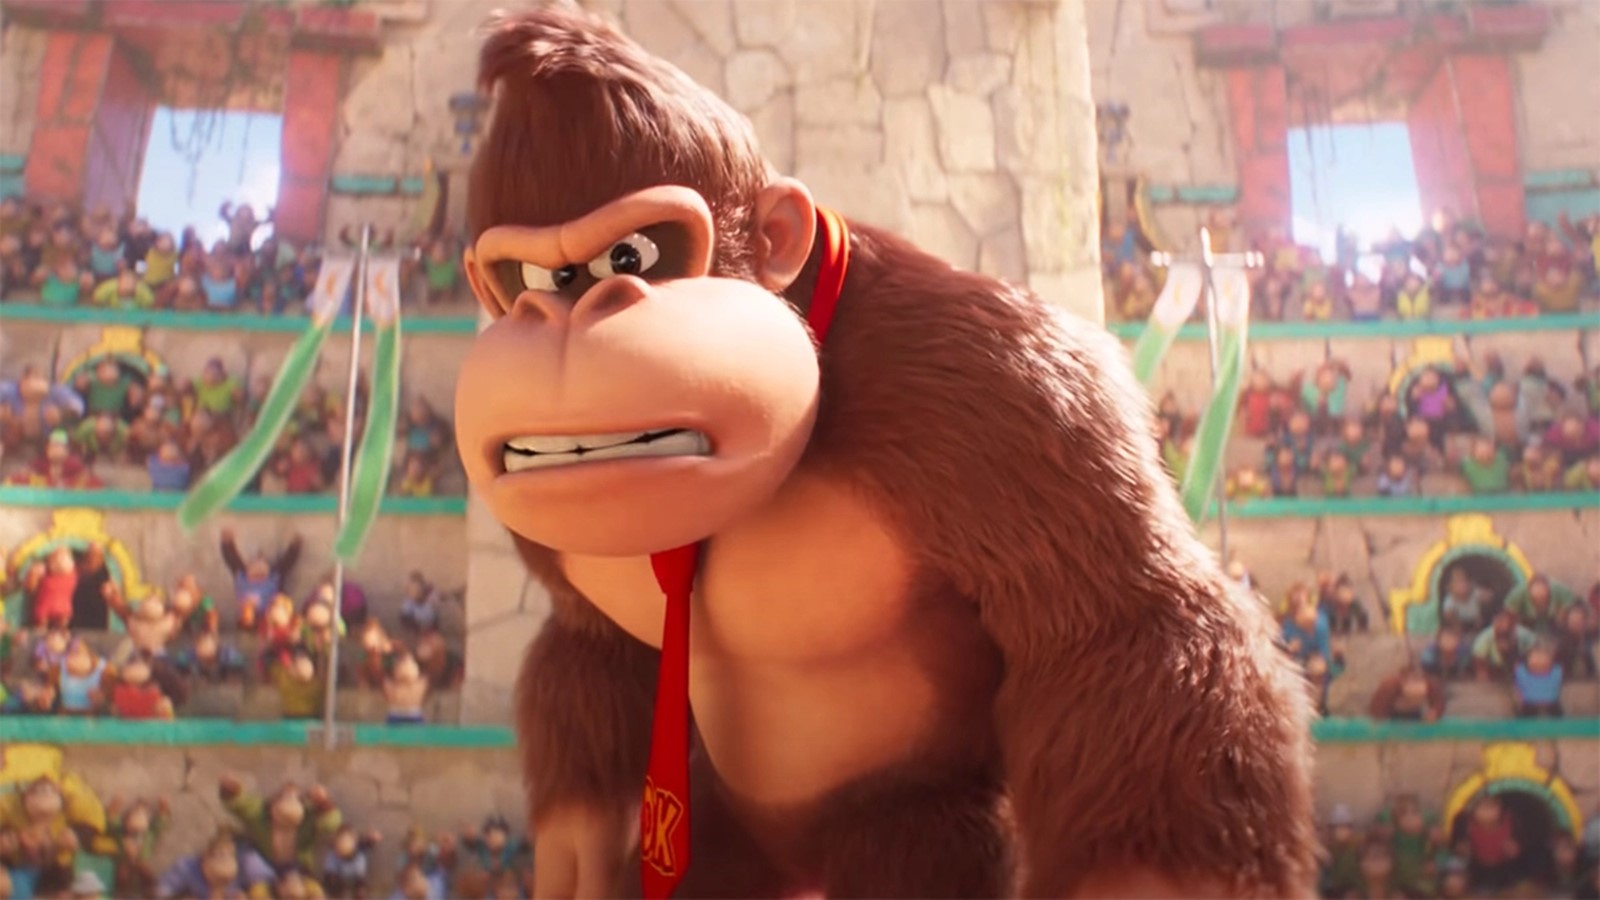 Super Mario Bros. The Movie, Seth Rogen reveals which spinoff he would like for Donkey Kong